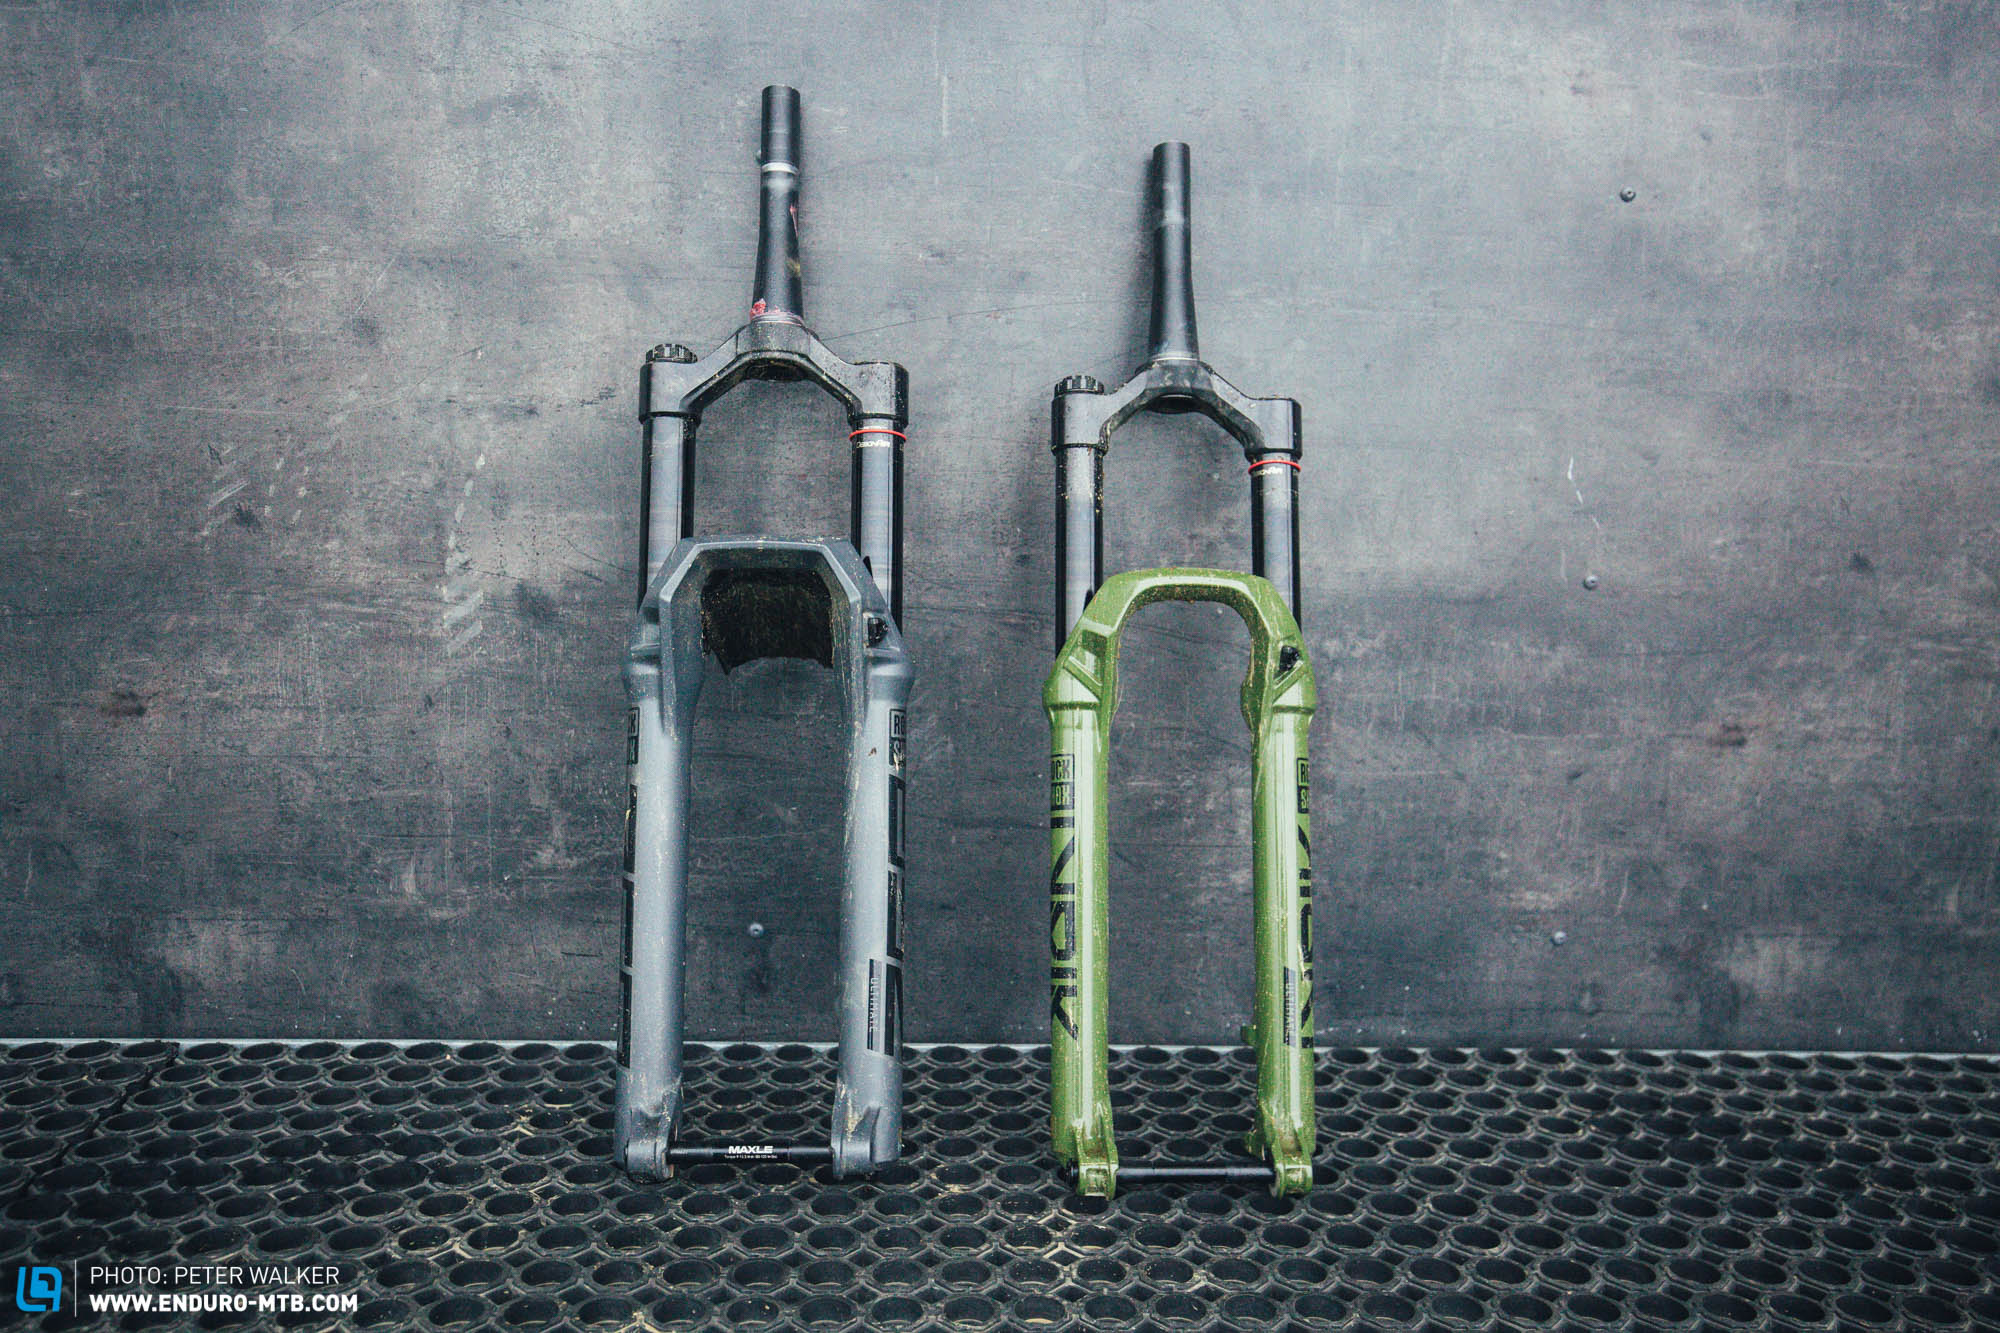 RockShox lower leg fork service – Improve the performance and extend the life of your suspension fork